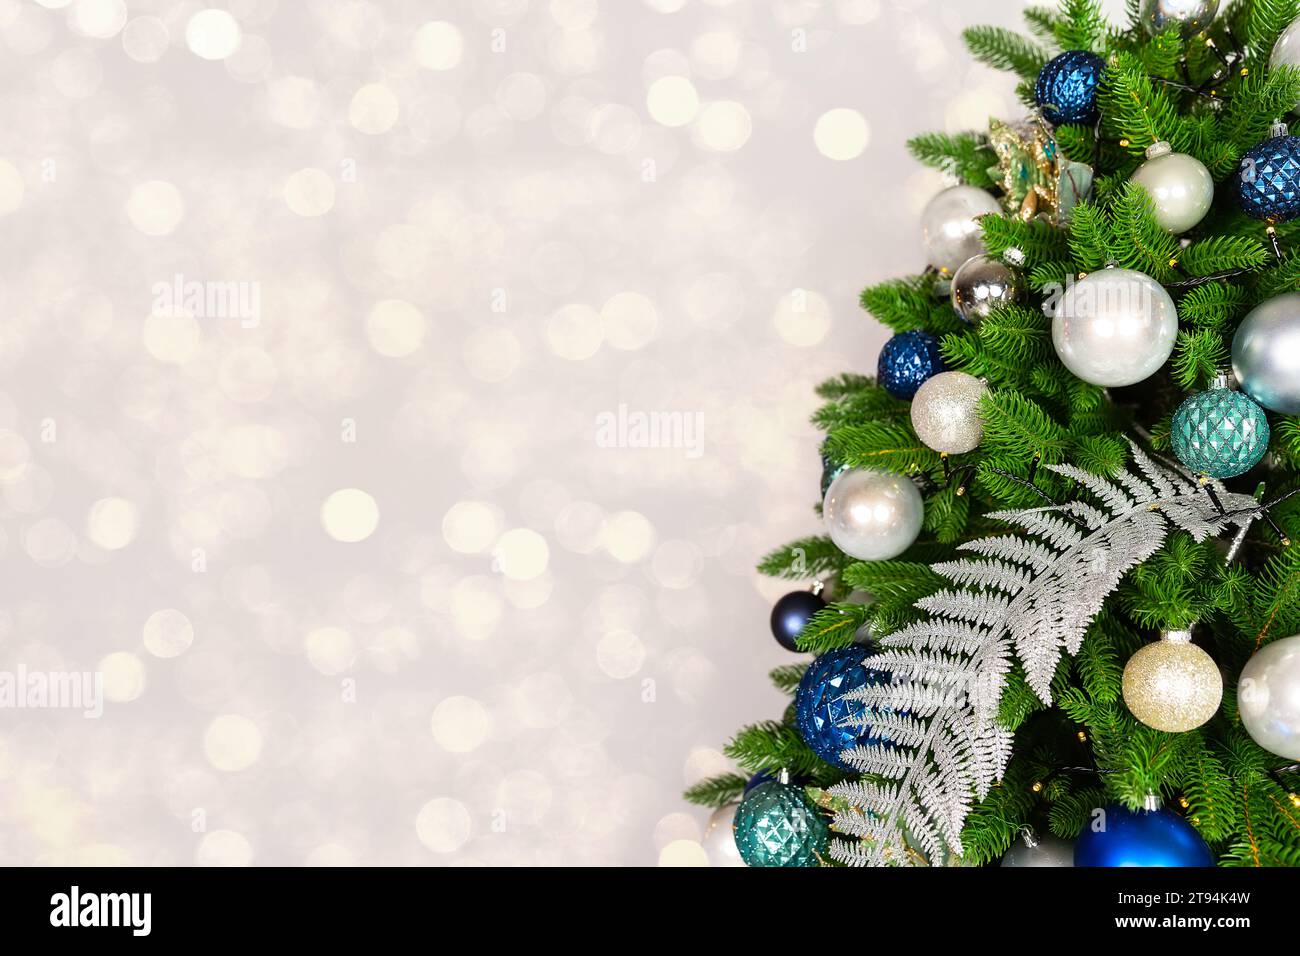 Holiday Christmas tree with ornaments and balls on silver background with golden bokeh lights. Merry Christmas and a happy New Year greeting card. Win Stock Photo